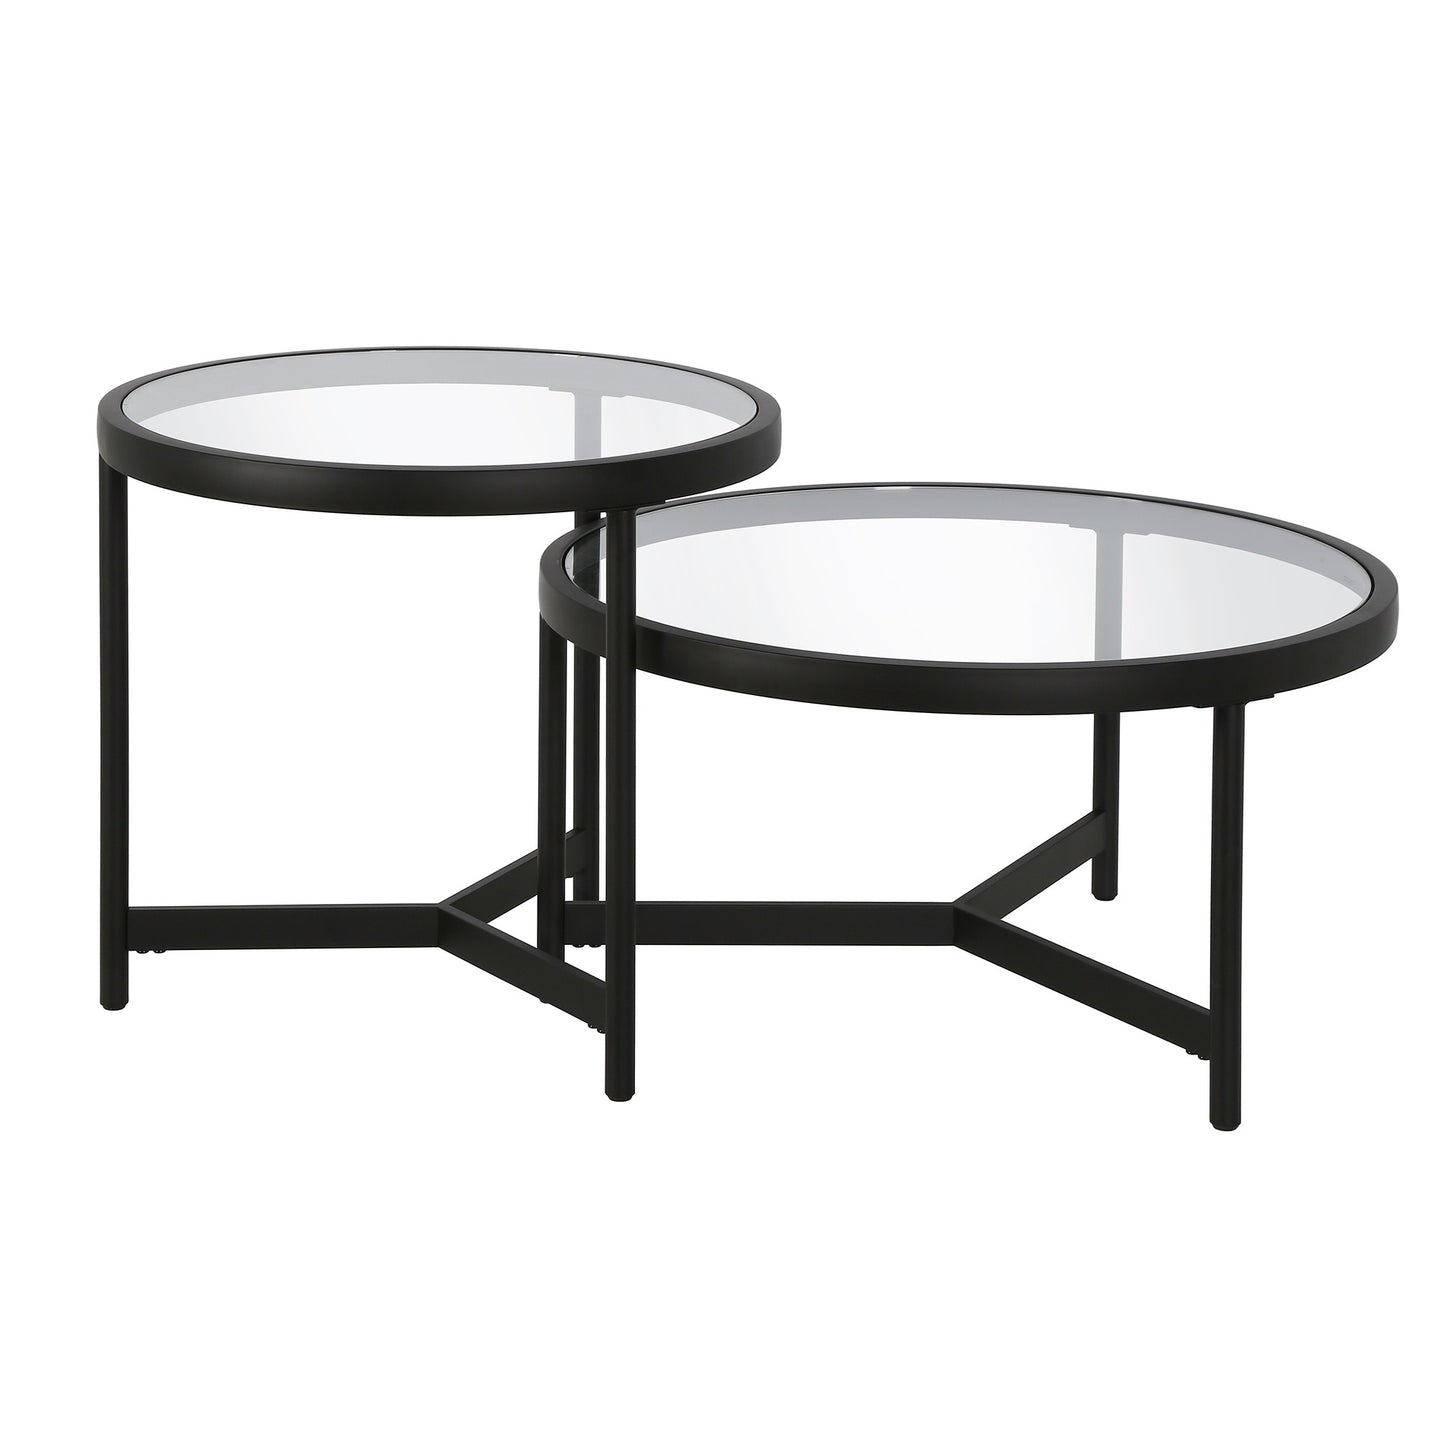 Set of Two 30" Black Glass And Steel Round Nested Coffee Tables